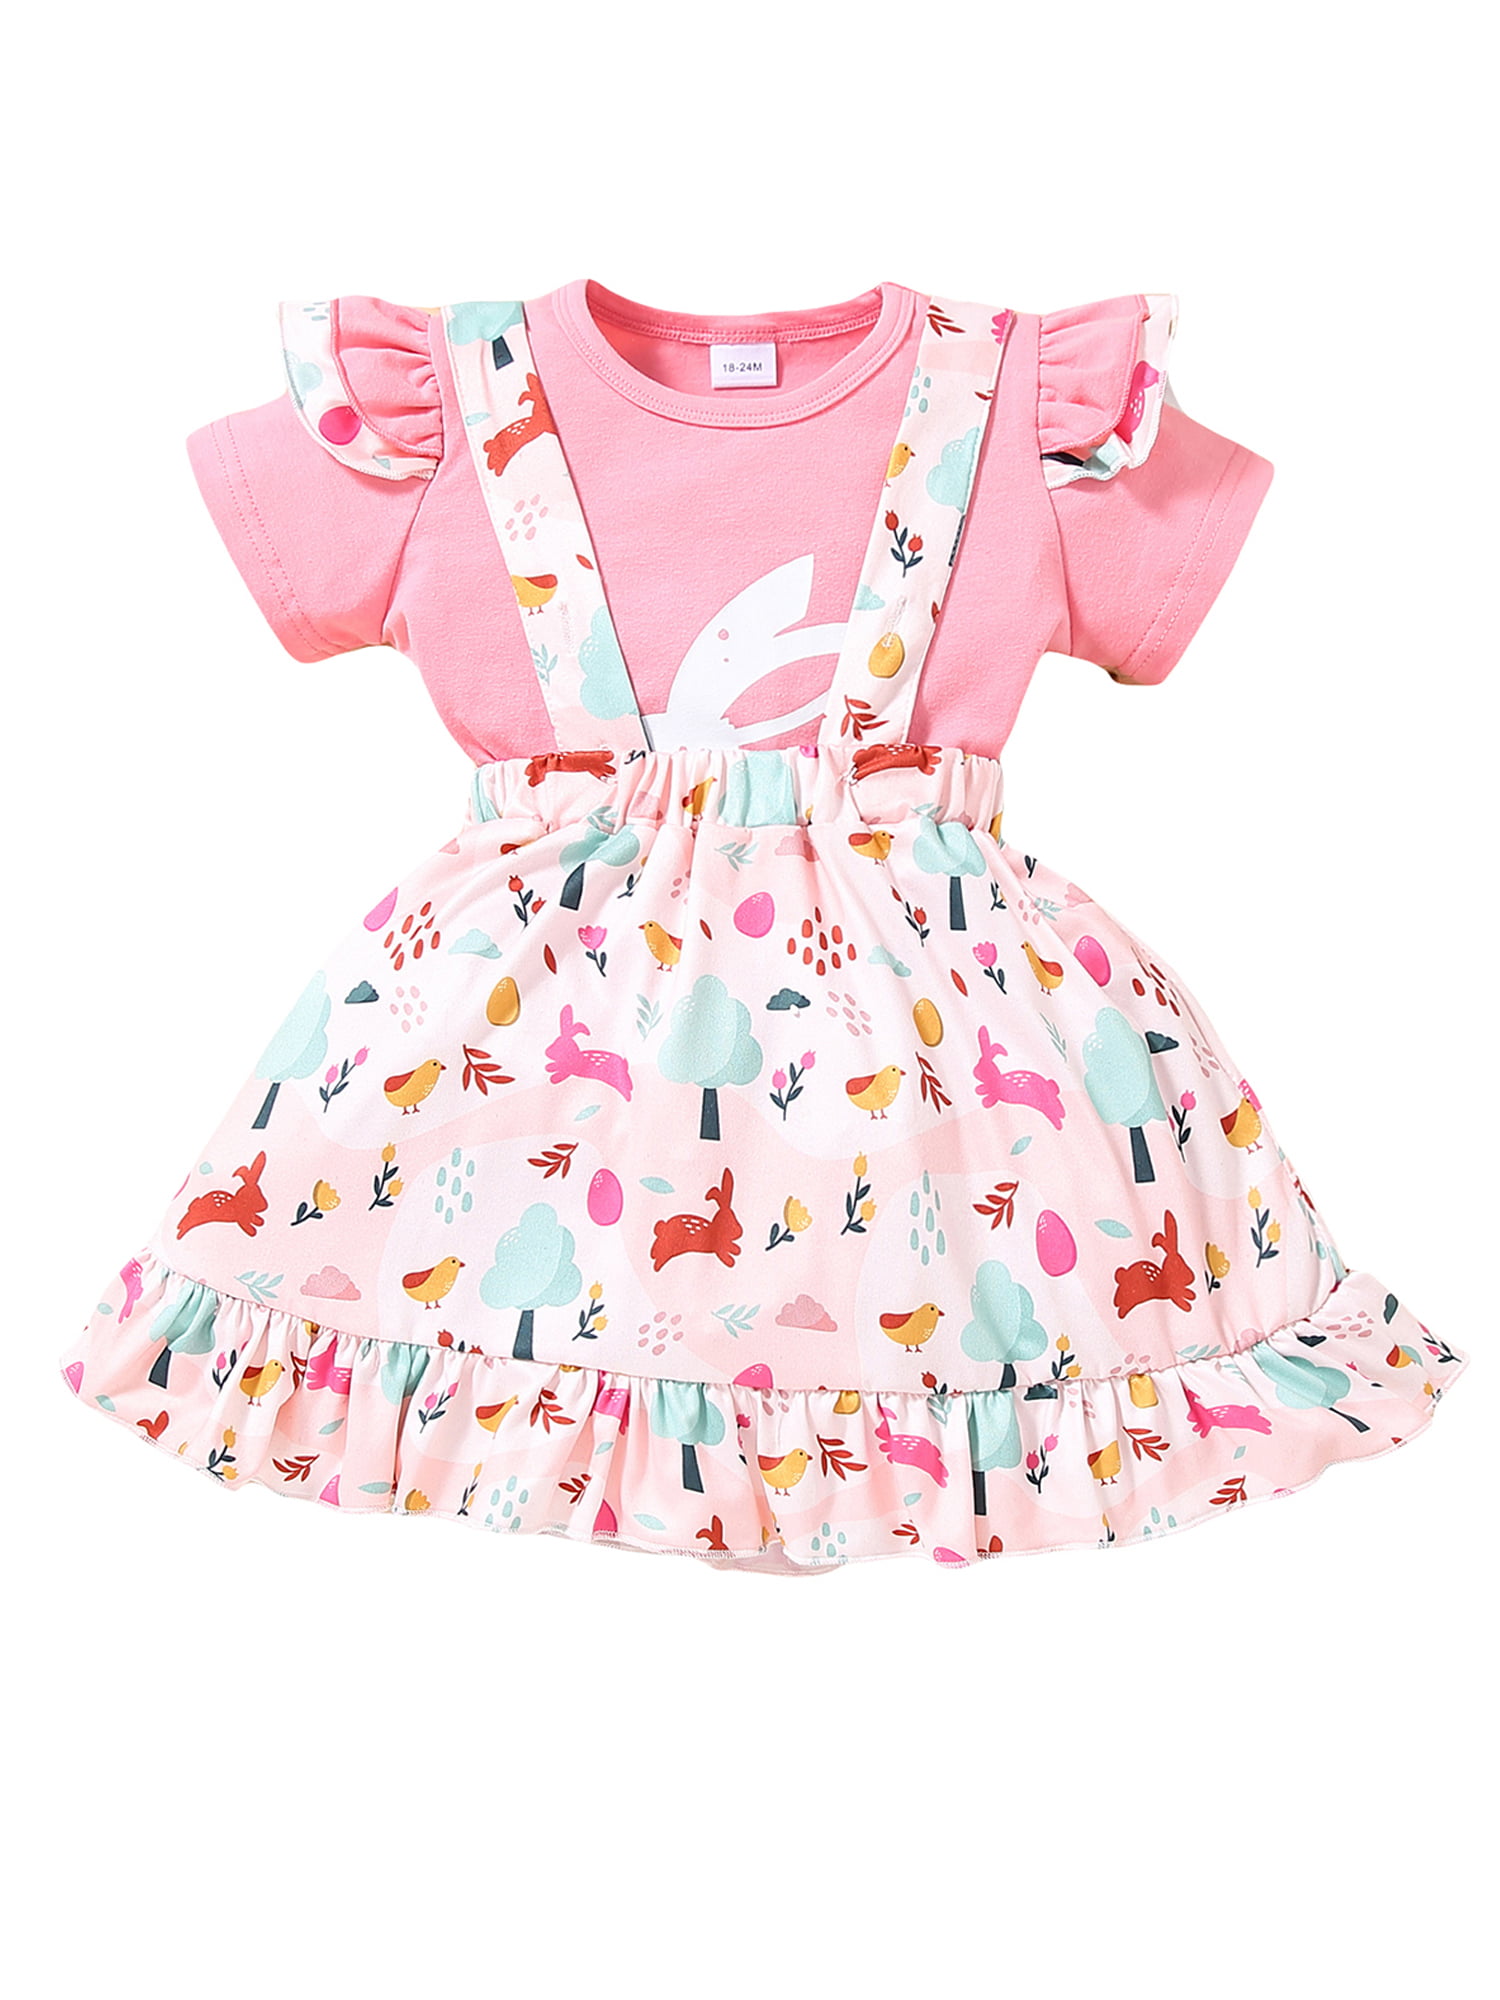 Details about   NEW Easter Bunny Rabbit Girls Pink Shirt Suspender Skirt Outfit Set 